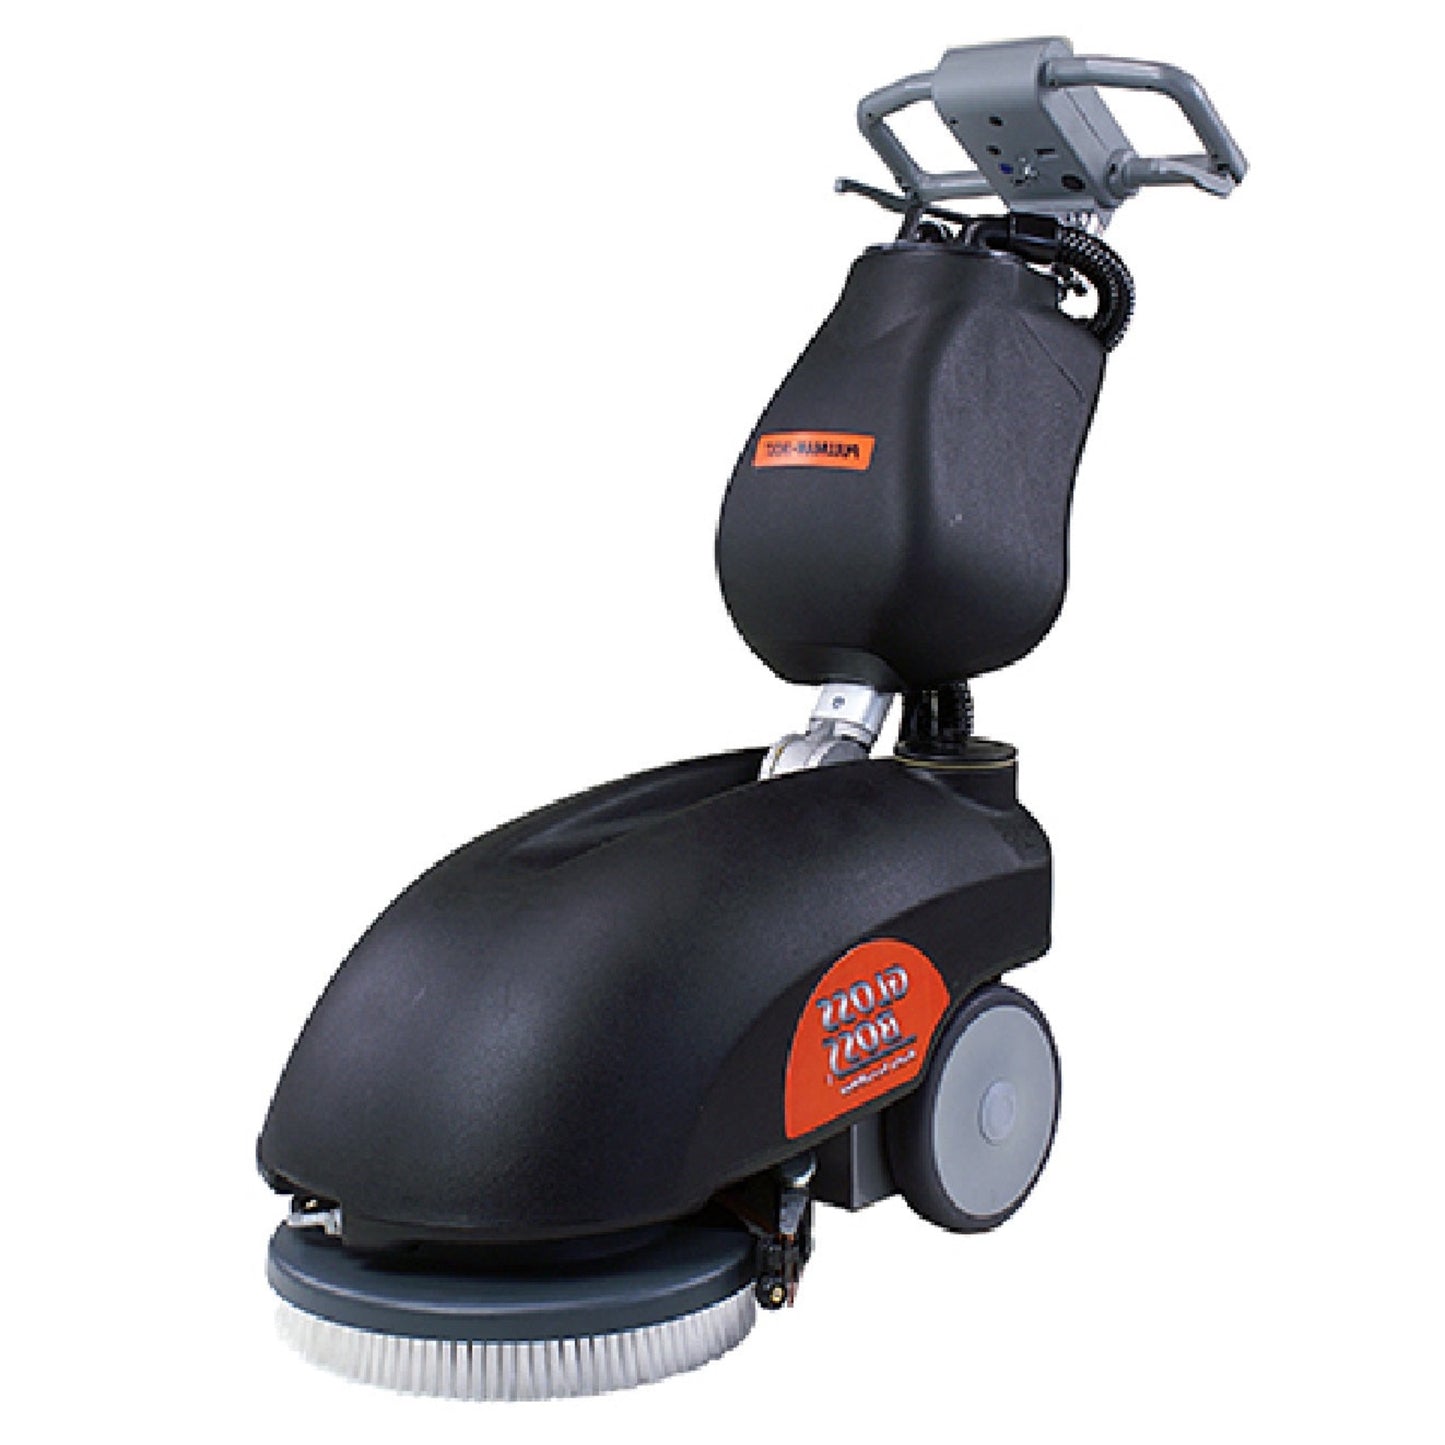 Traction autoscrubber - Gloss Boss GB14 - 14"